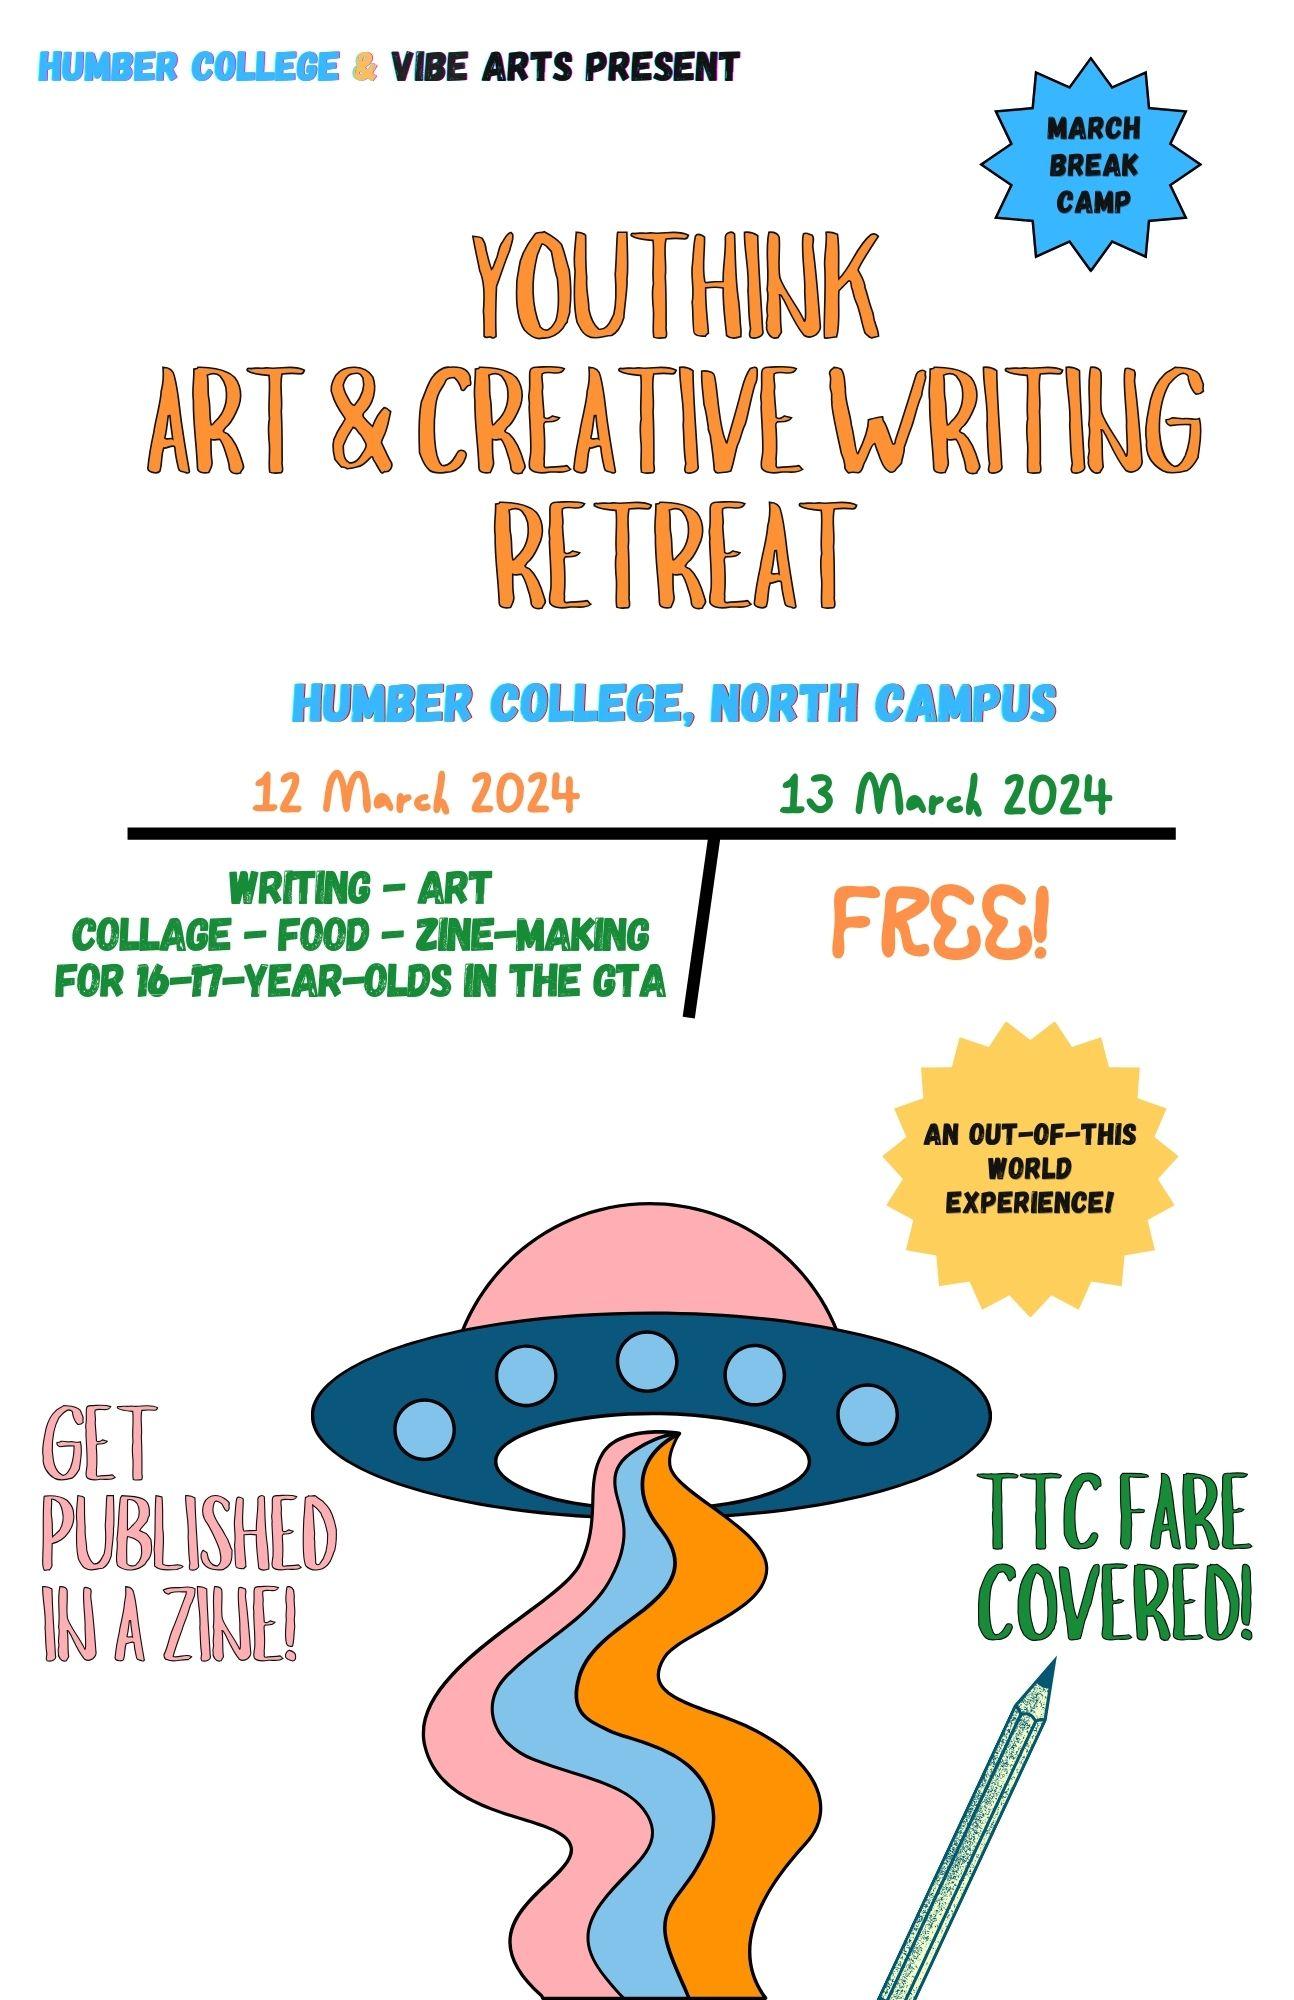 A flyer advertising the YouthINK creative writing retreat.